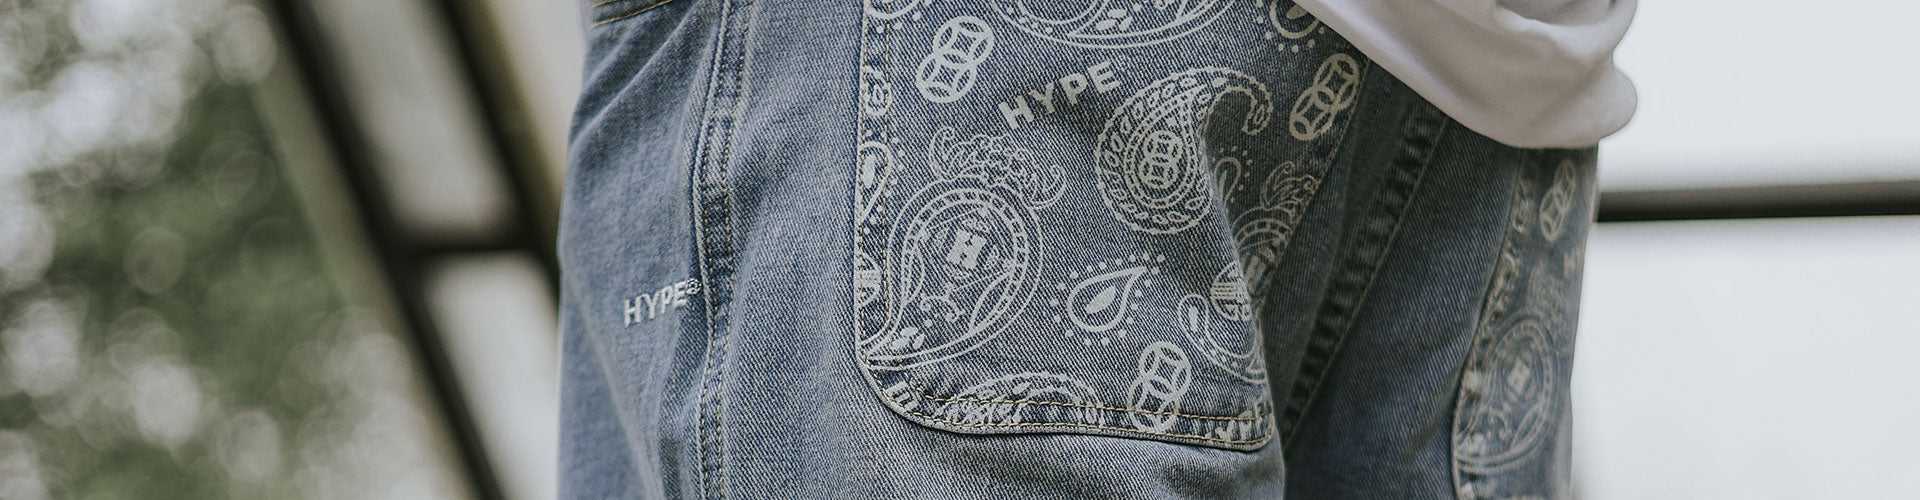 Hype Shorts Collection - HYPE